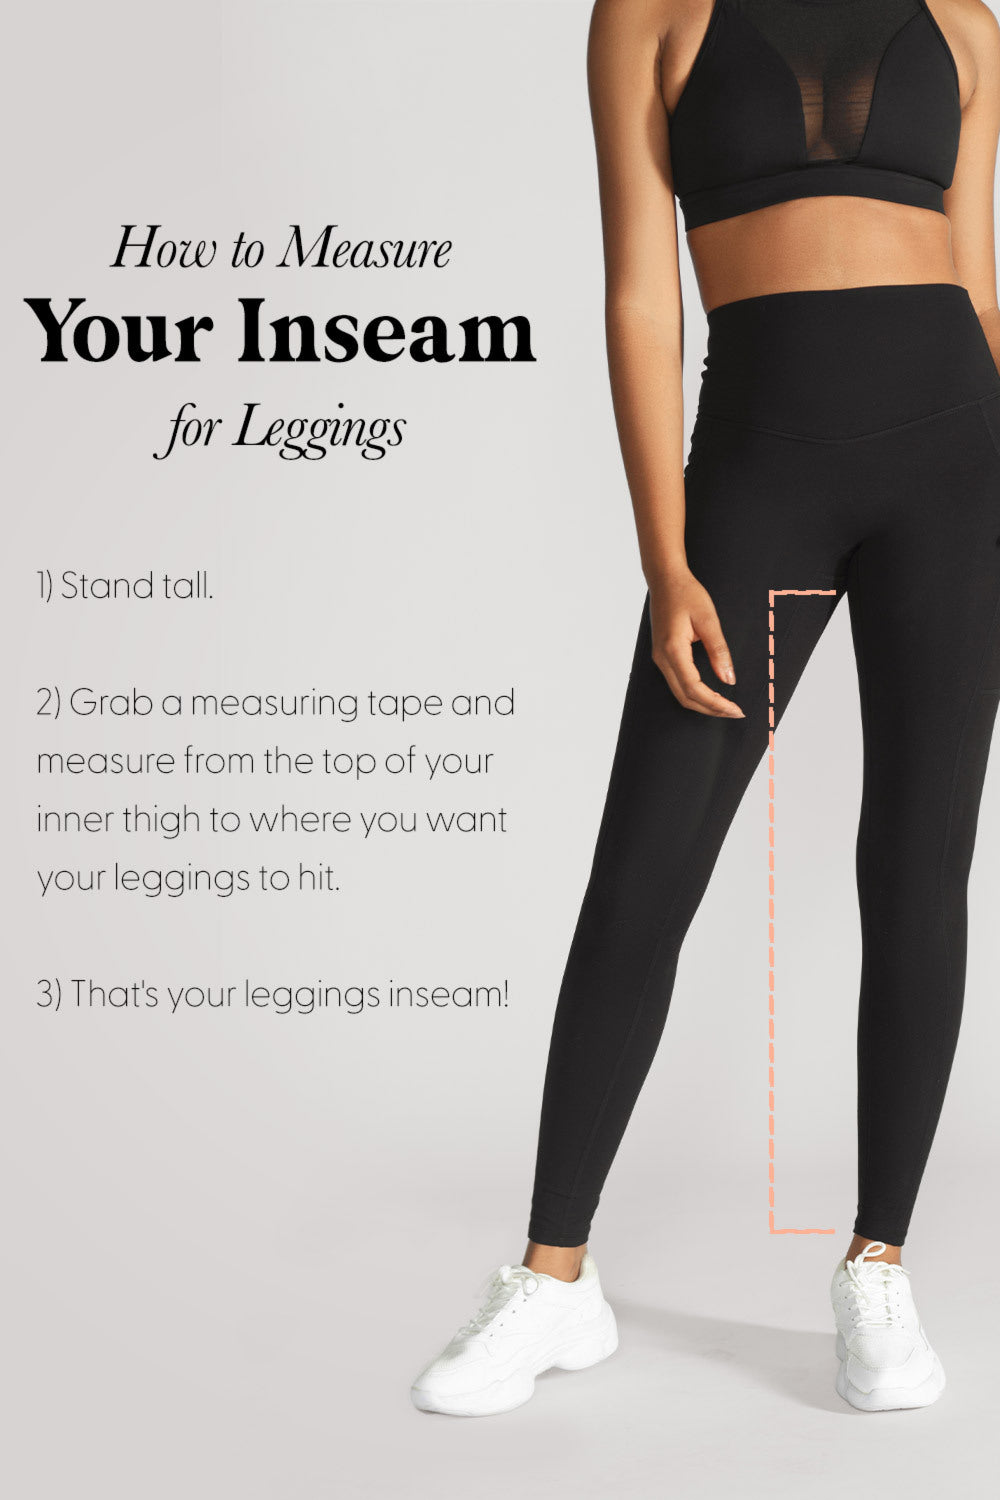 Replying to @Pheob our pet hair, resistant leggings are moisture